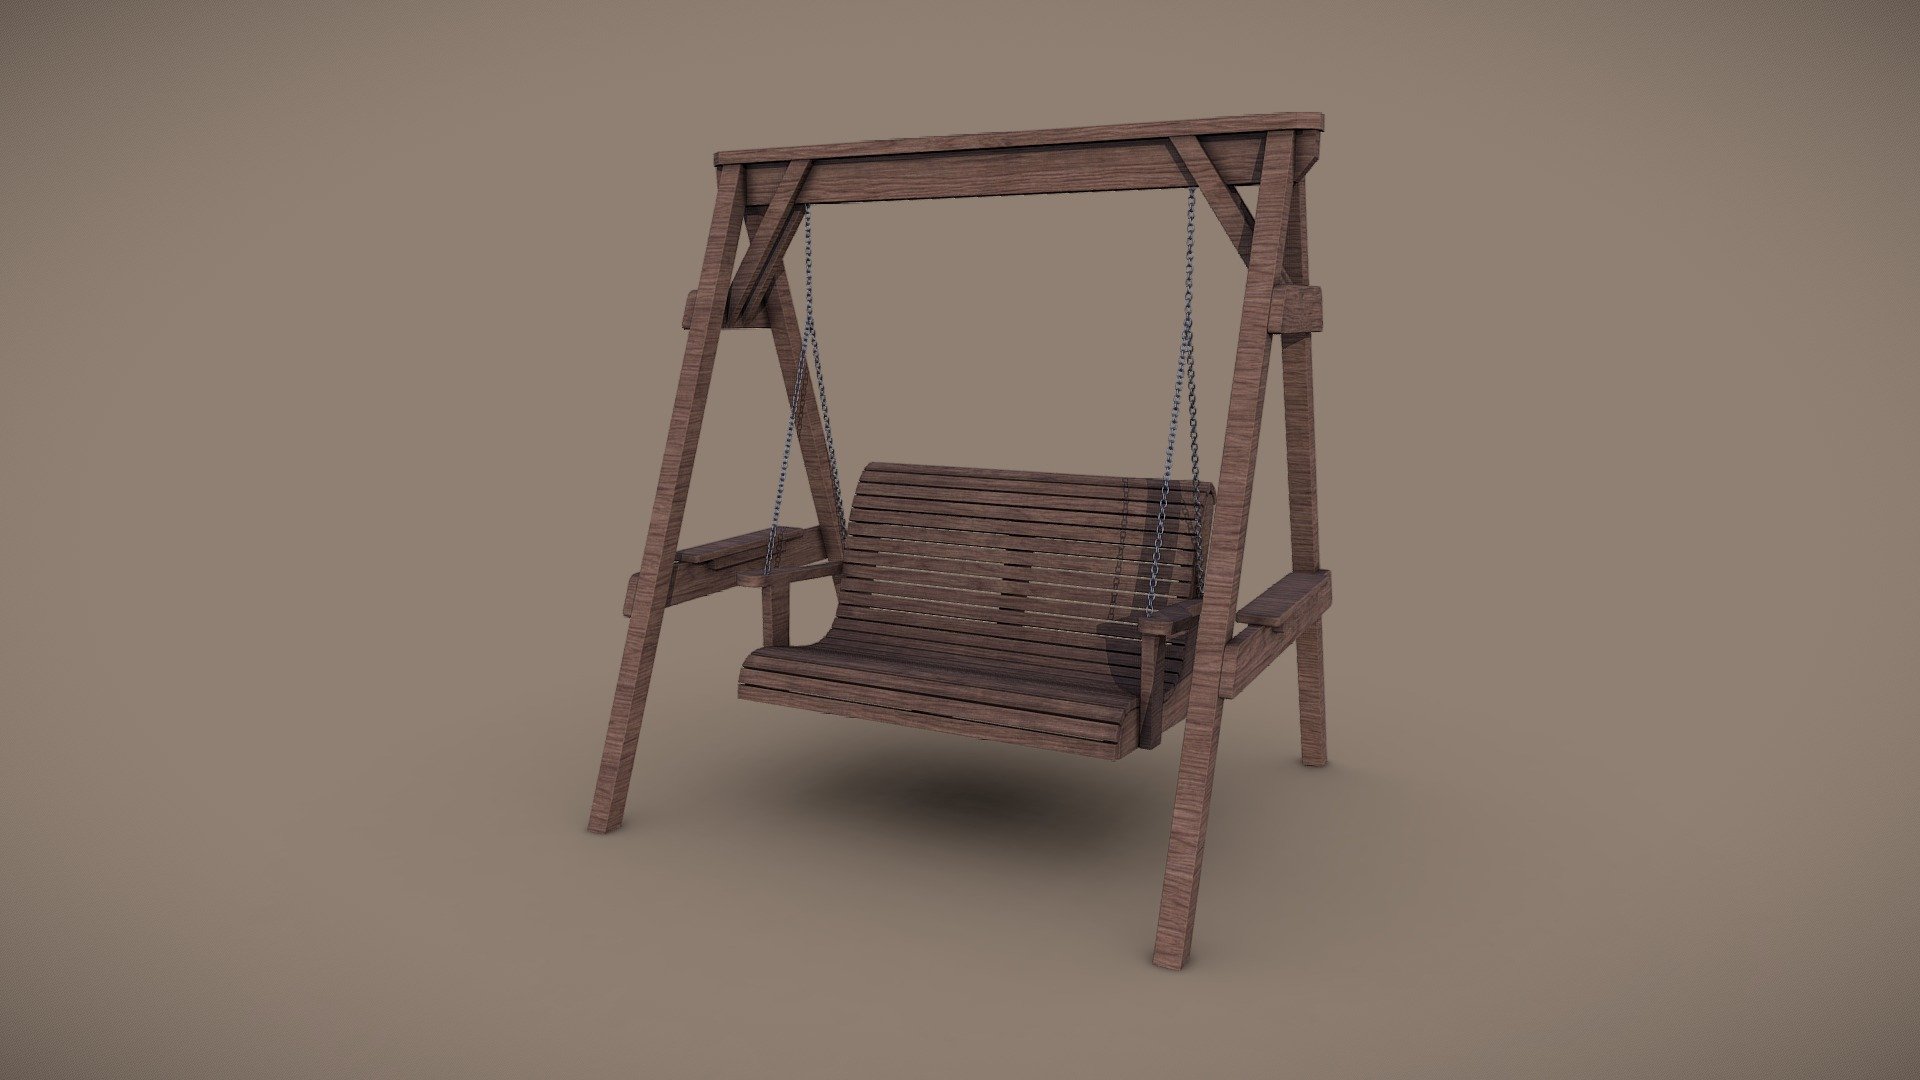 Model of a wooden swinging chair.
Modelled in Blender.
Textured and baked in Substance Painter.
Set to accurate scale.
Ready for use in a game/animation scene.

Artstation - Swing Chair - Download Free 3D model by Daz (@Darren.Hogan) 3d model